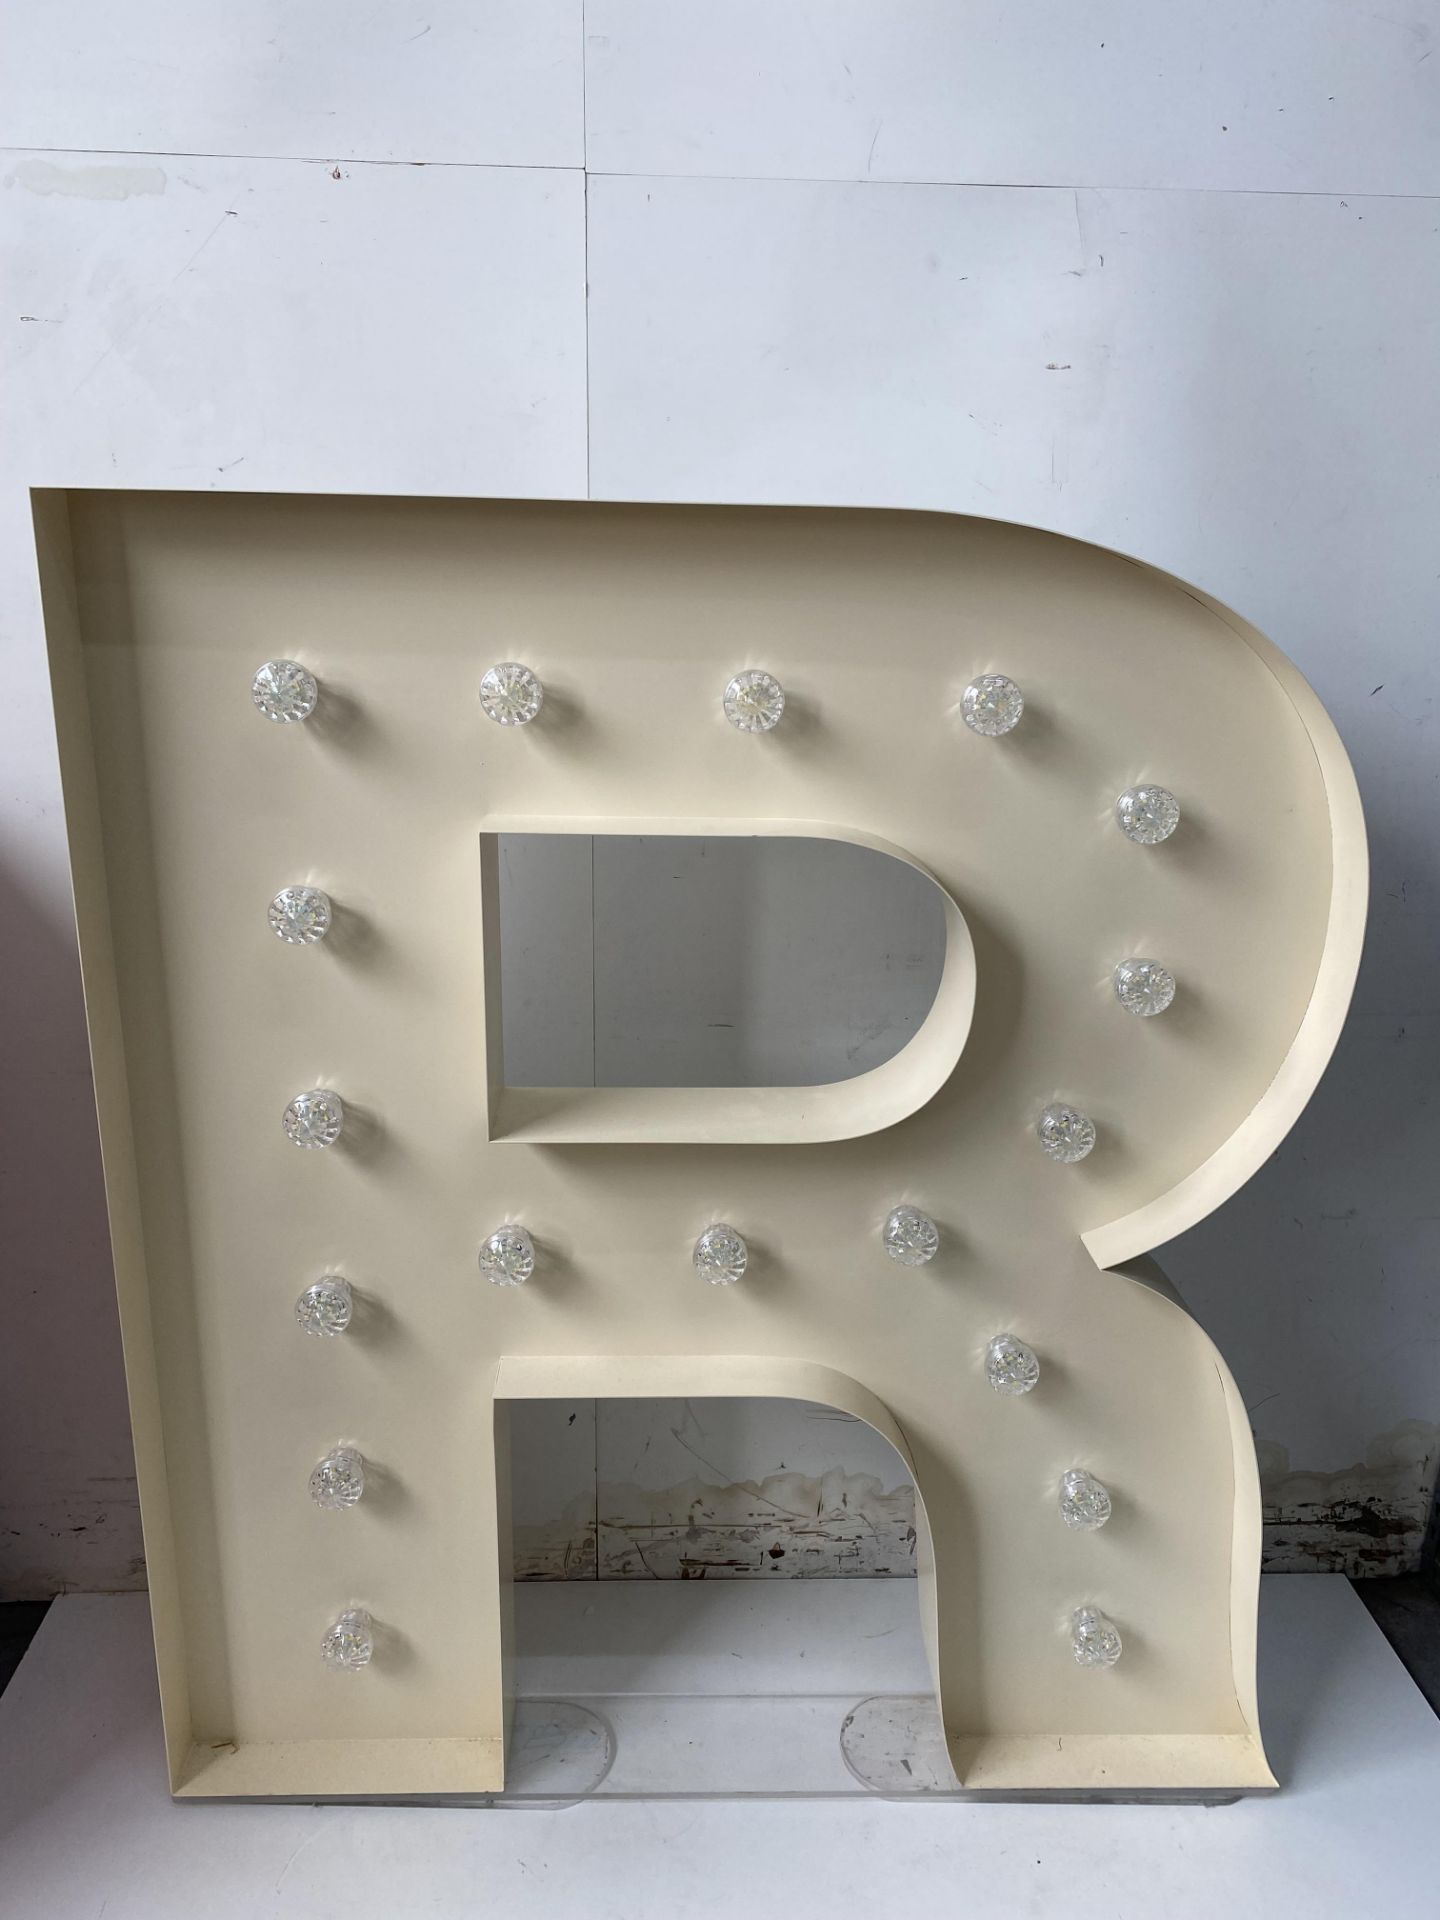 Mr & Mrs Light Up LED Large Marquee Letters Decoration - Image 4 of 23